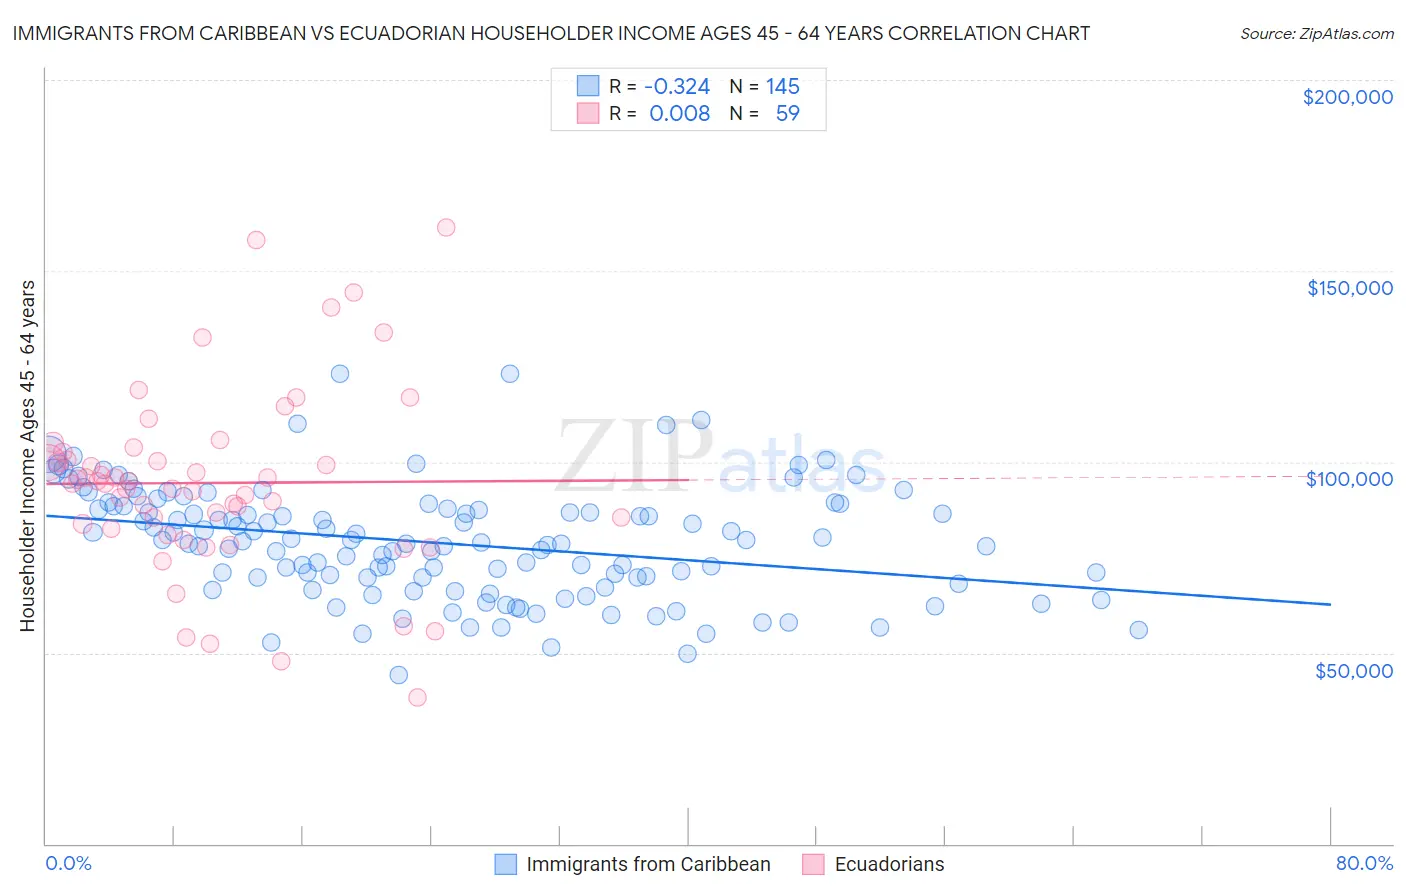 Immigrants from Caribbean vs Ecuadorian Householder Income Ages 45 - 64 years